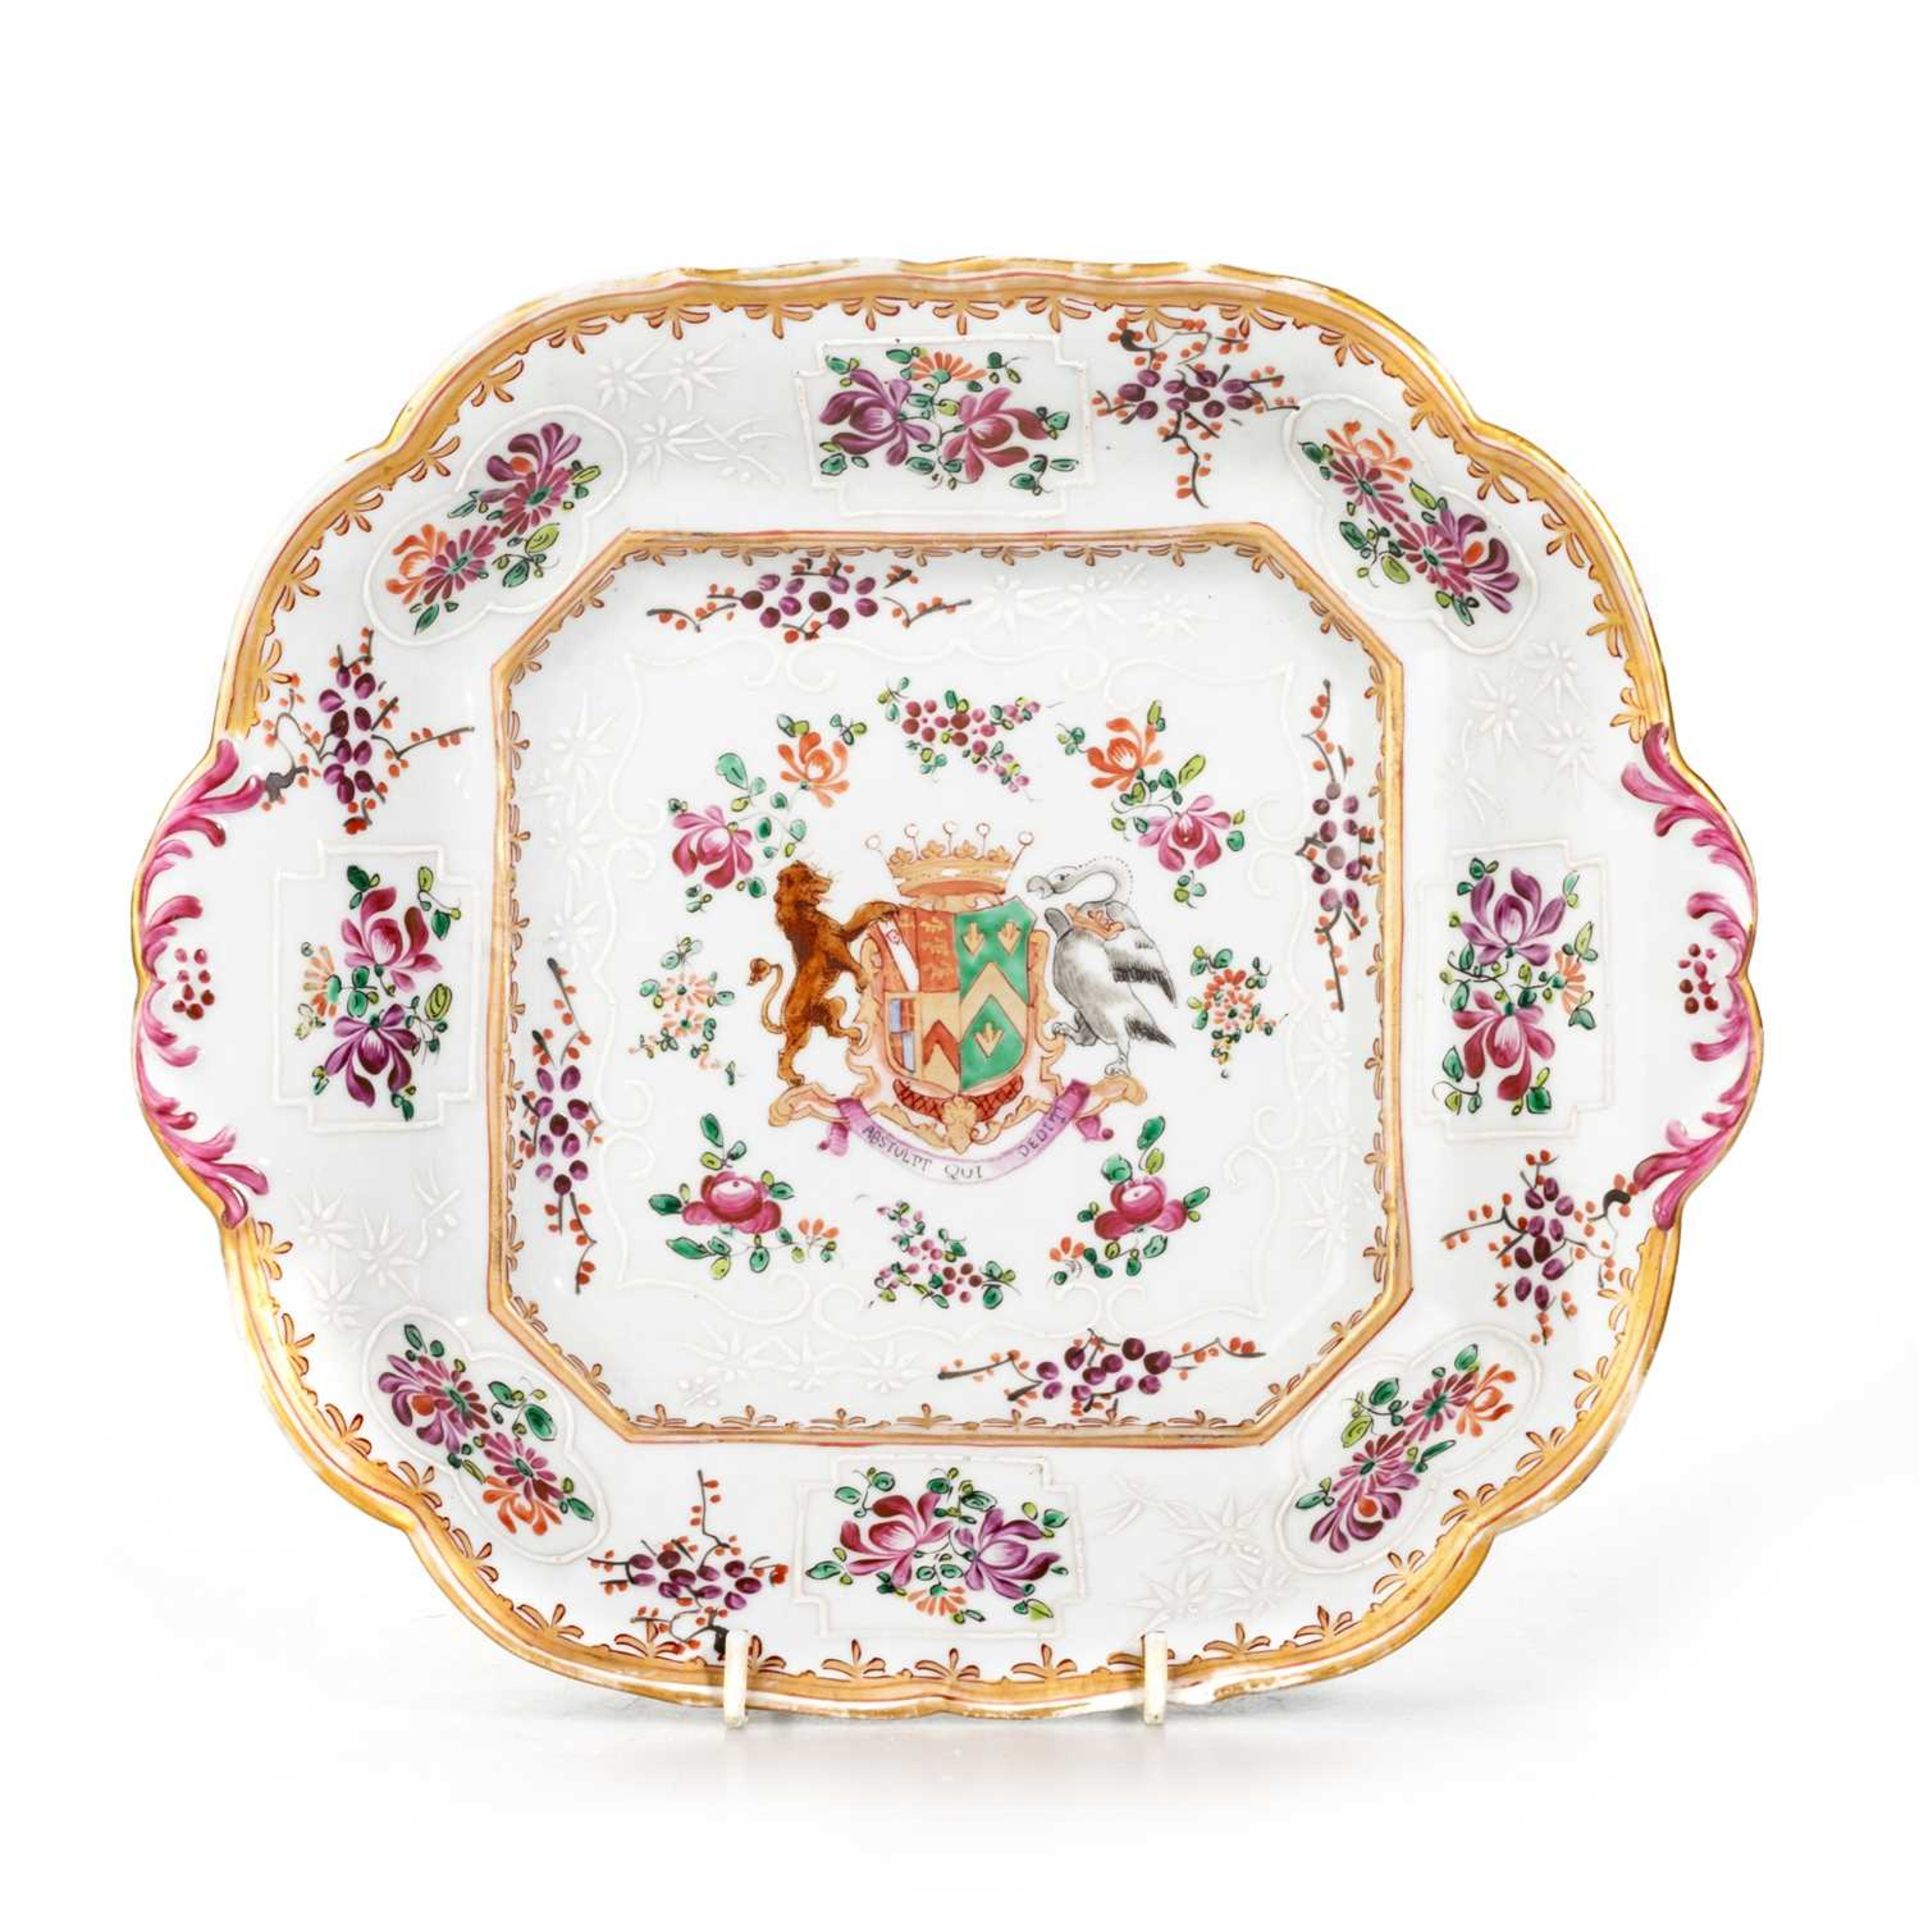 A SAMSON PORCELAIN DESSERT SERVICE IN CHINESE EXPORT ARMORIAL STYLE - Image 4 of 6